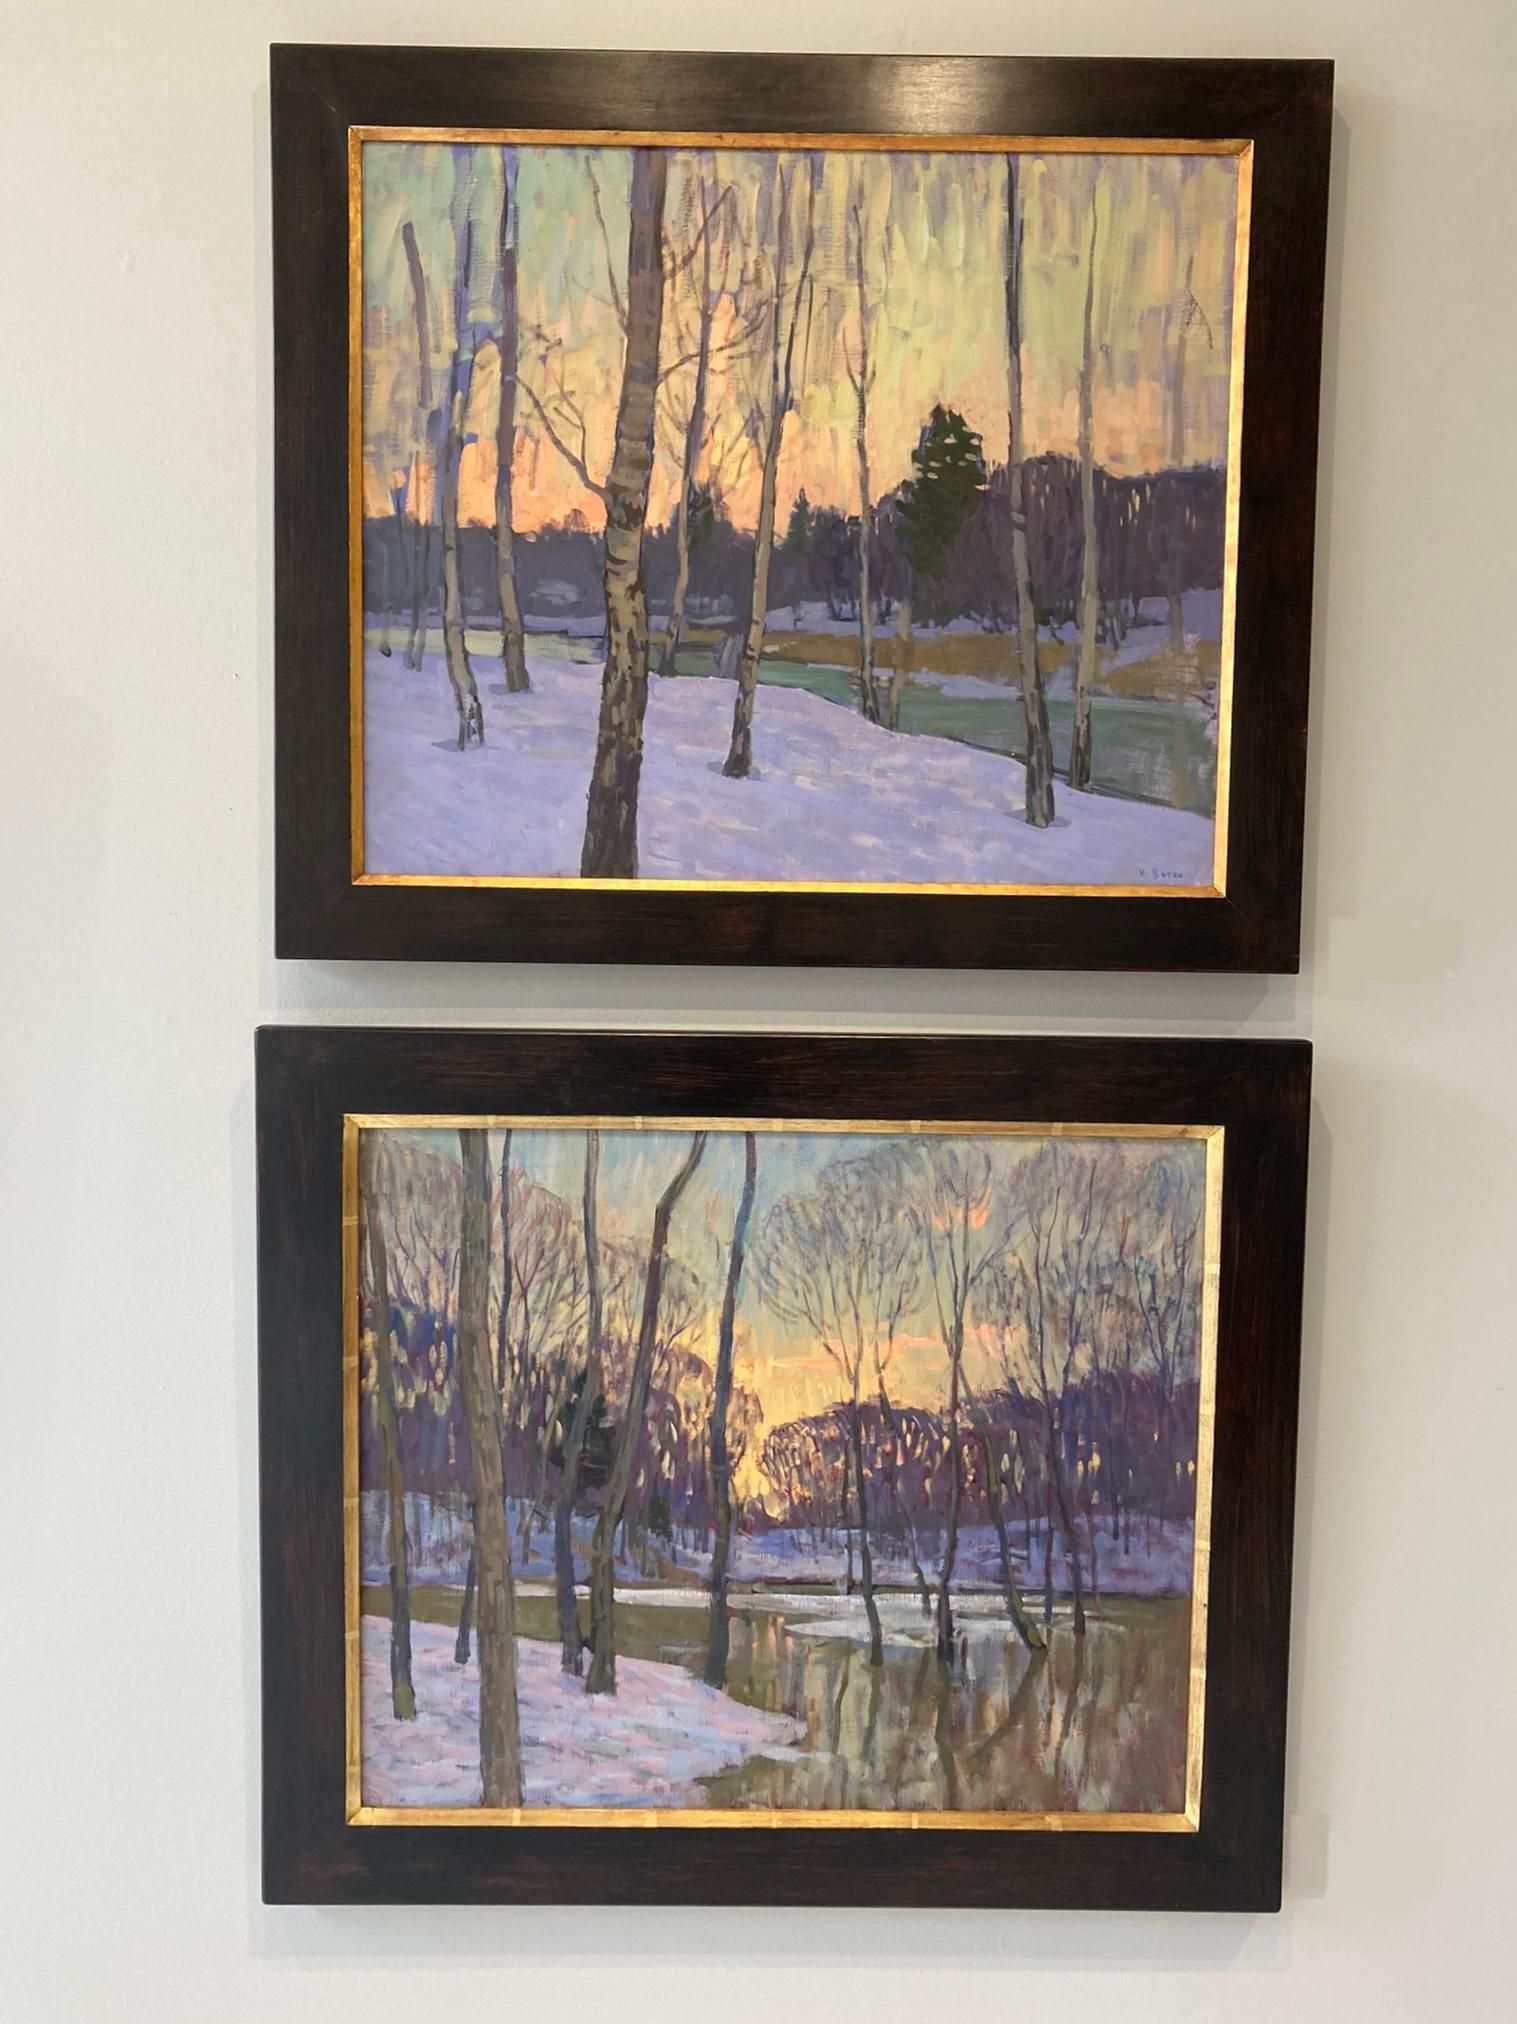 An impressionist painting of trees silhouetted against a bright sunset, trees growing out of a pond flooded with snow melt and a hill rising up against the horizon. As the name implies, the cool alizarin underpainting peeks through thicker